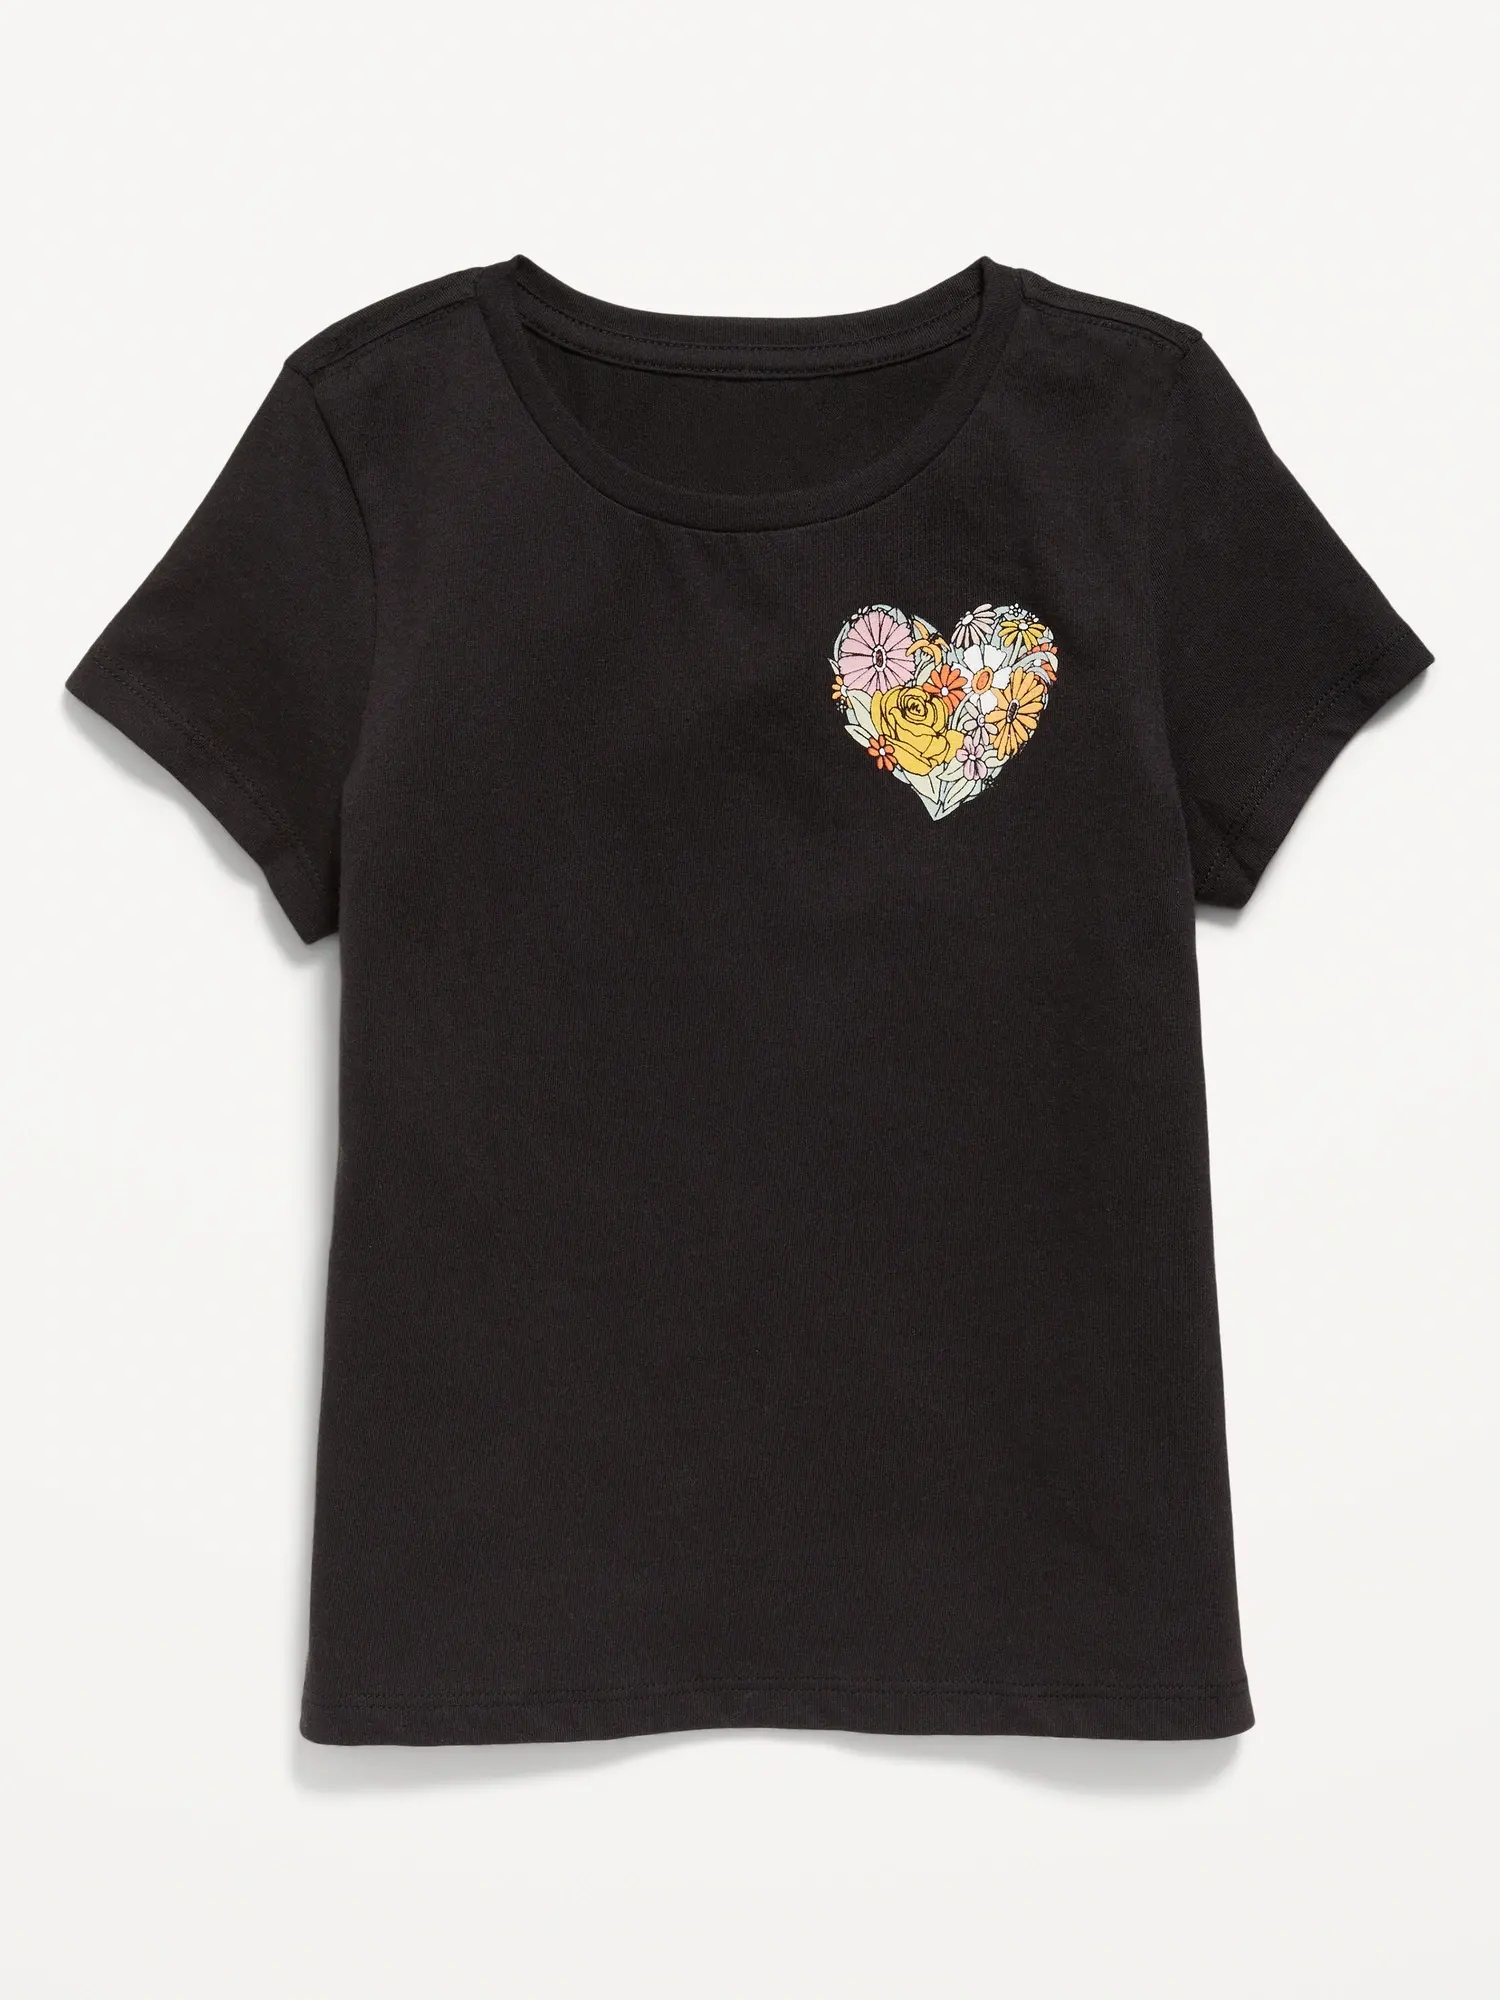 Old Navy Short-Sleeve Graphic T-Shirt for Girls black. 1